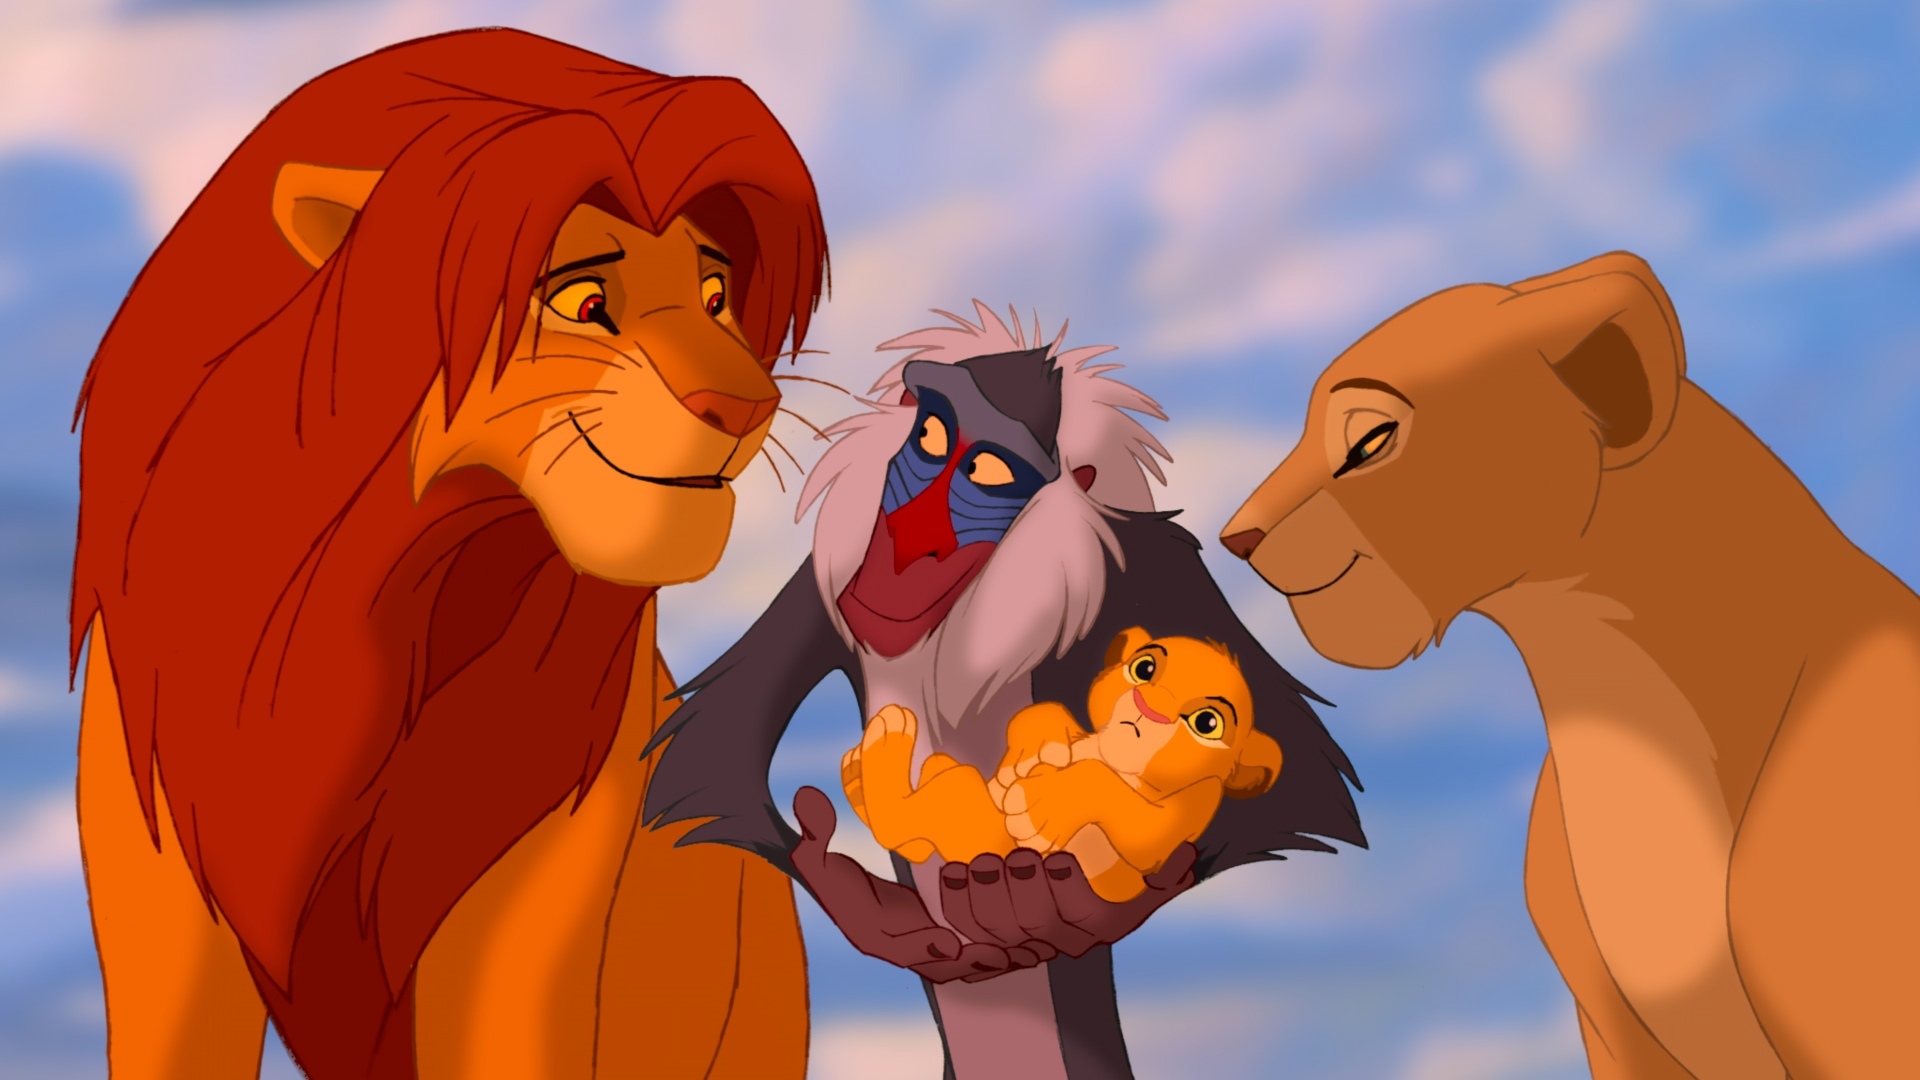 "THE LION KING" (L-R) Simba (voice by Matthew Broderick), Rafiki (voice by Robert Guillaume), Kiara, Nala (voice by Moira Kelly) ©Disney Enterprises, Inc. All Rights Reserved.